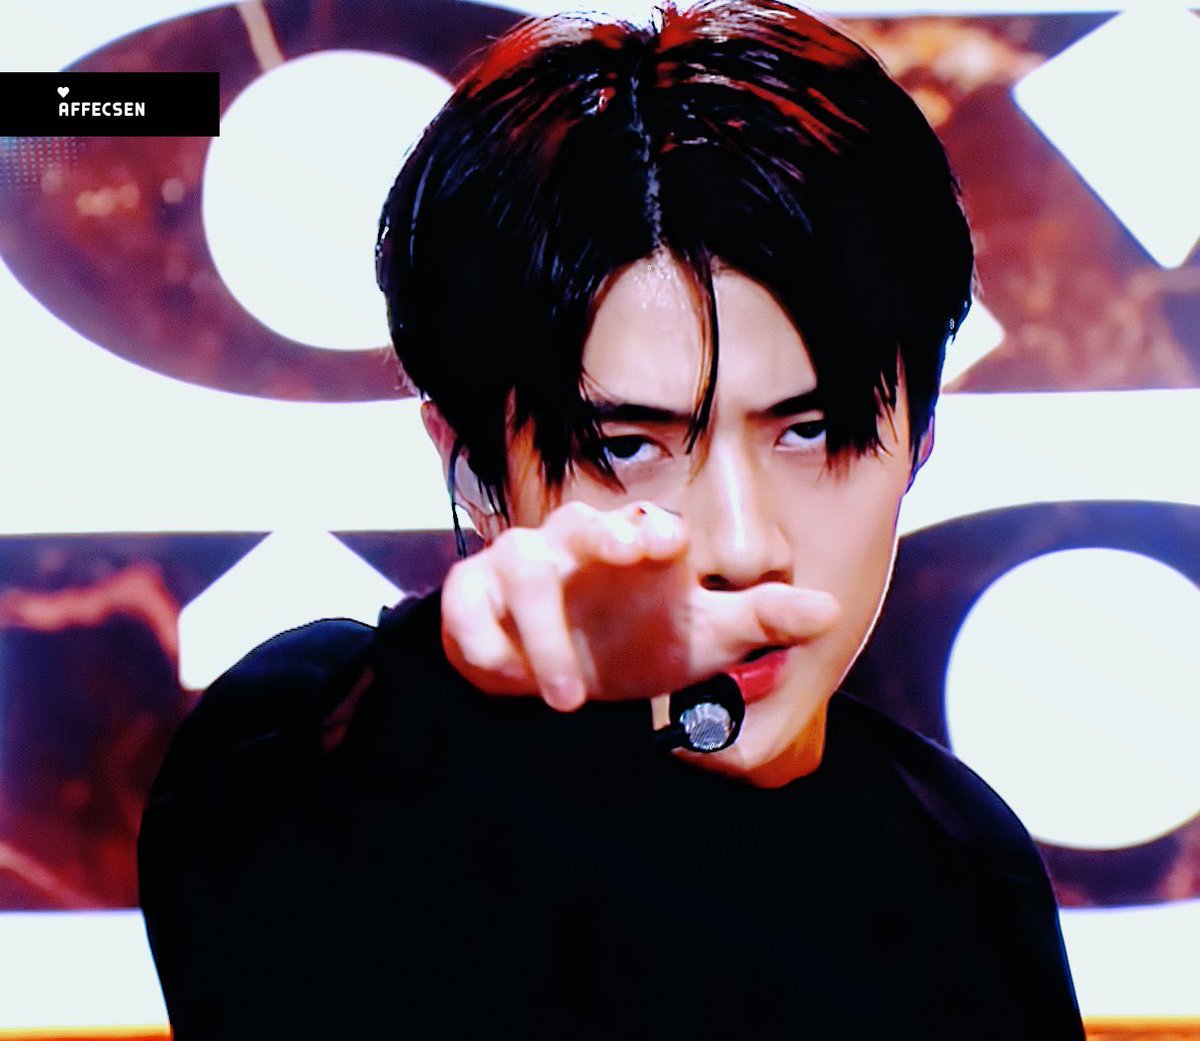 the audience is asking for sehun as levi therefore i shall provide